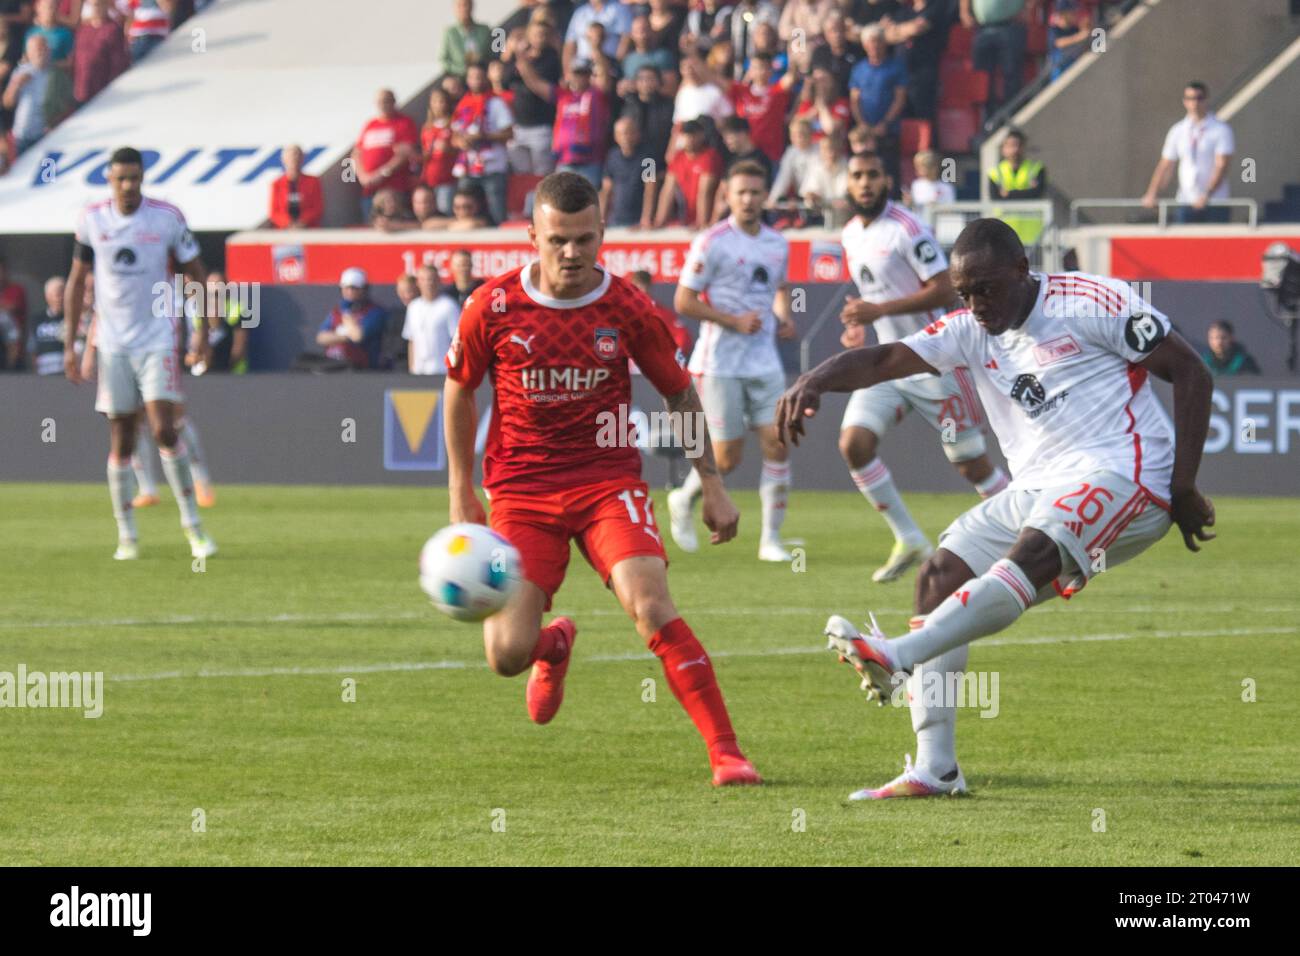 Jerome ROUSSILLION Union Berlin r. taking a shot, Florian PICK 1. FC Heidenheim can only look on Stock Photo